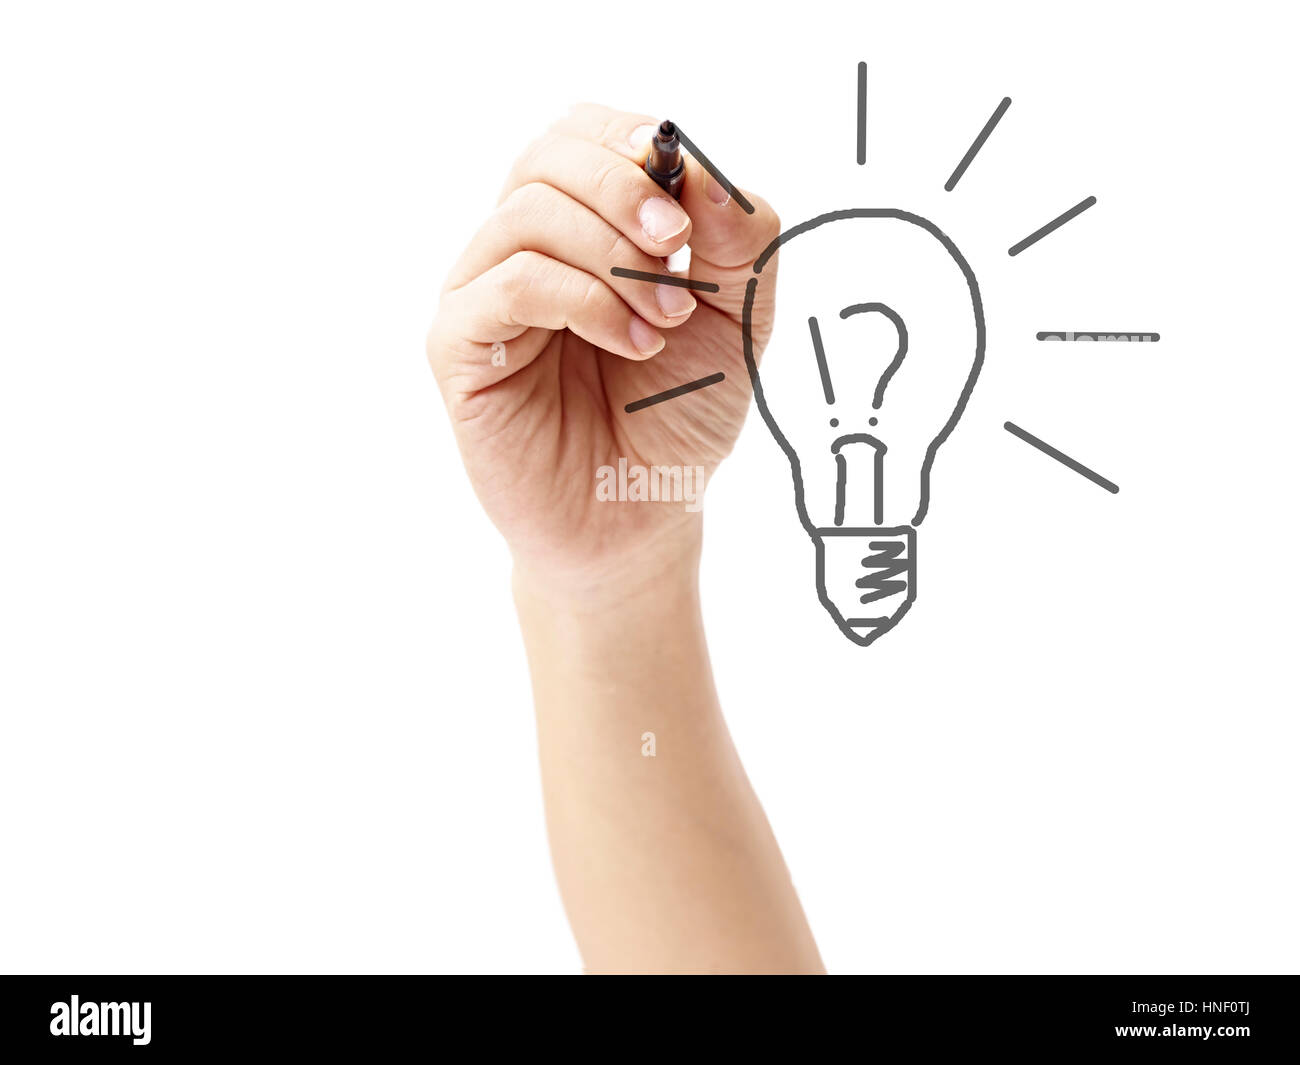 hand of a man drawing a light bulb, isolated on white background. Stock Photo